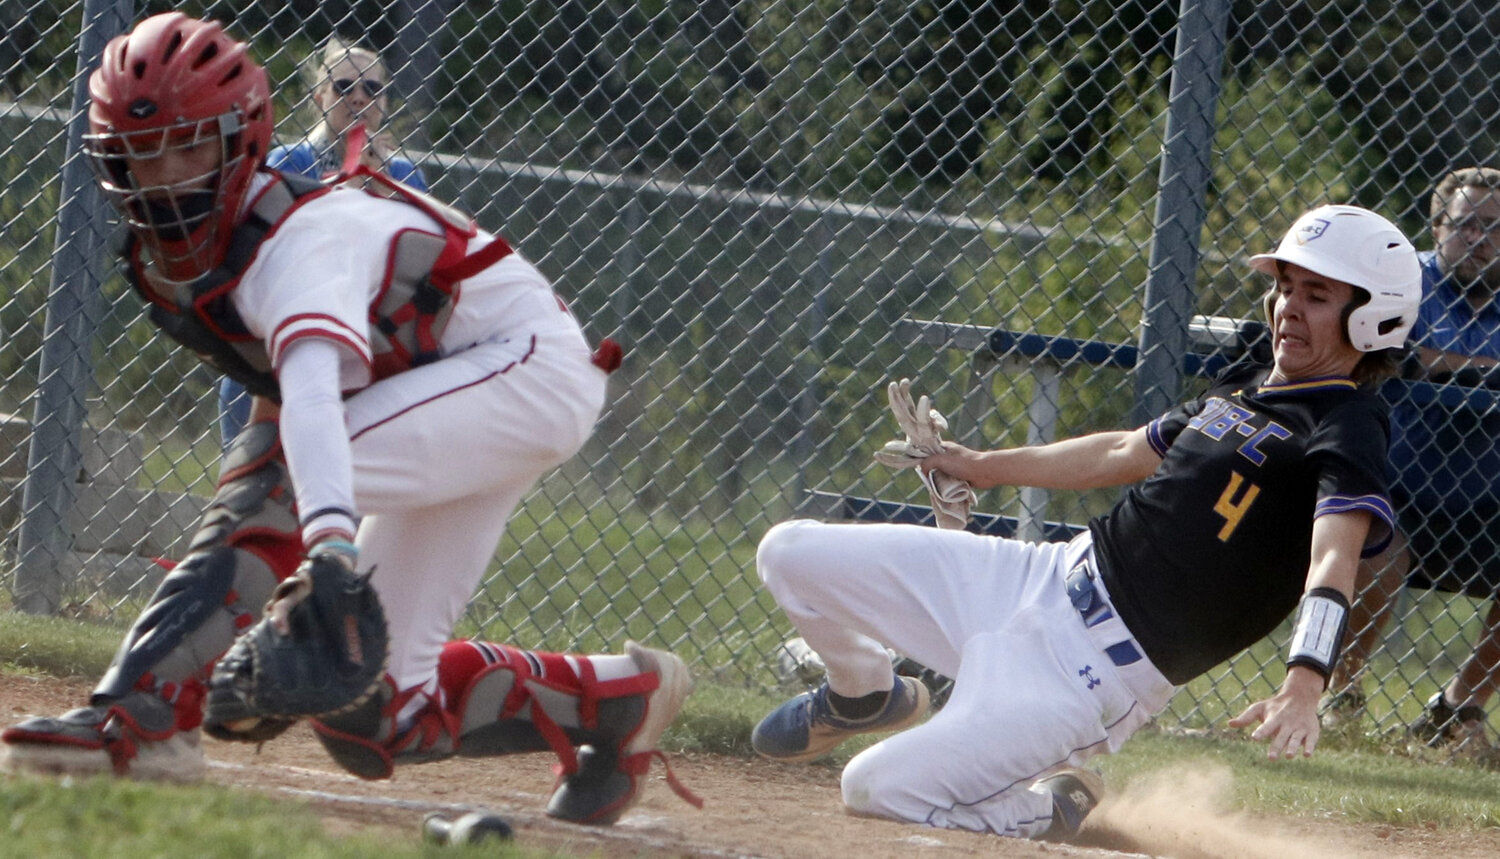 Jake Mitts (right) slides safely into home plate during last week's game.